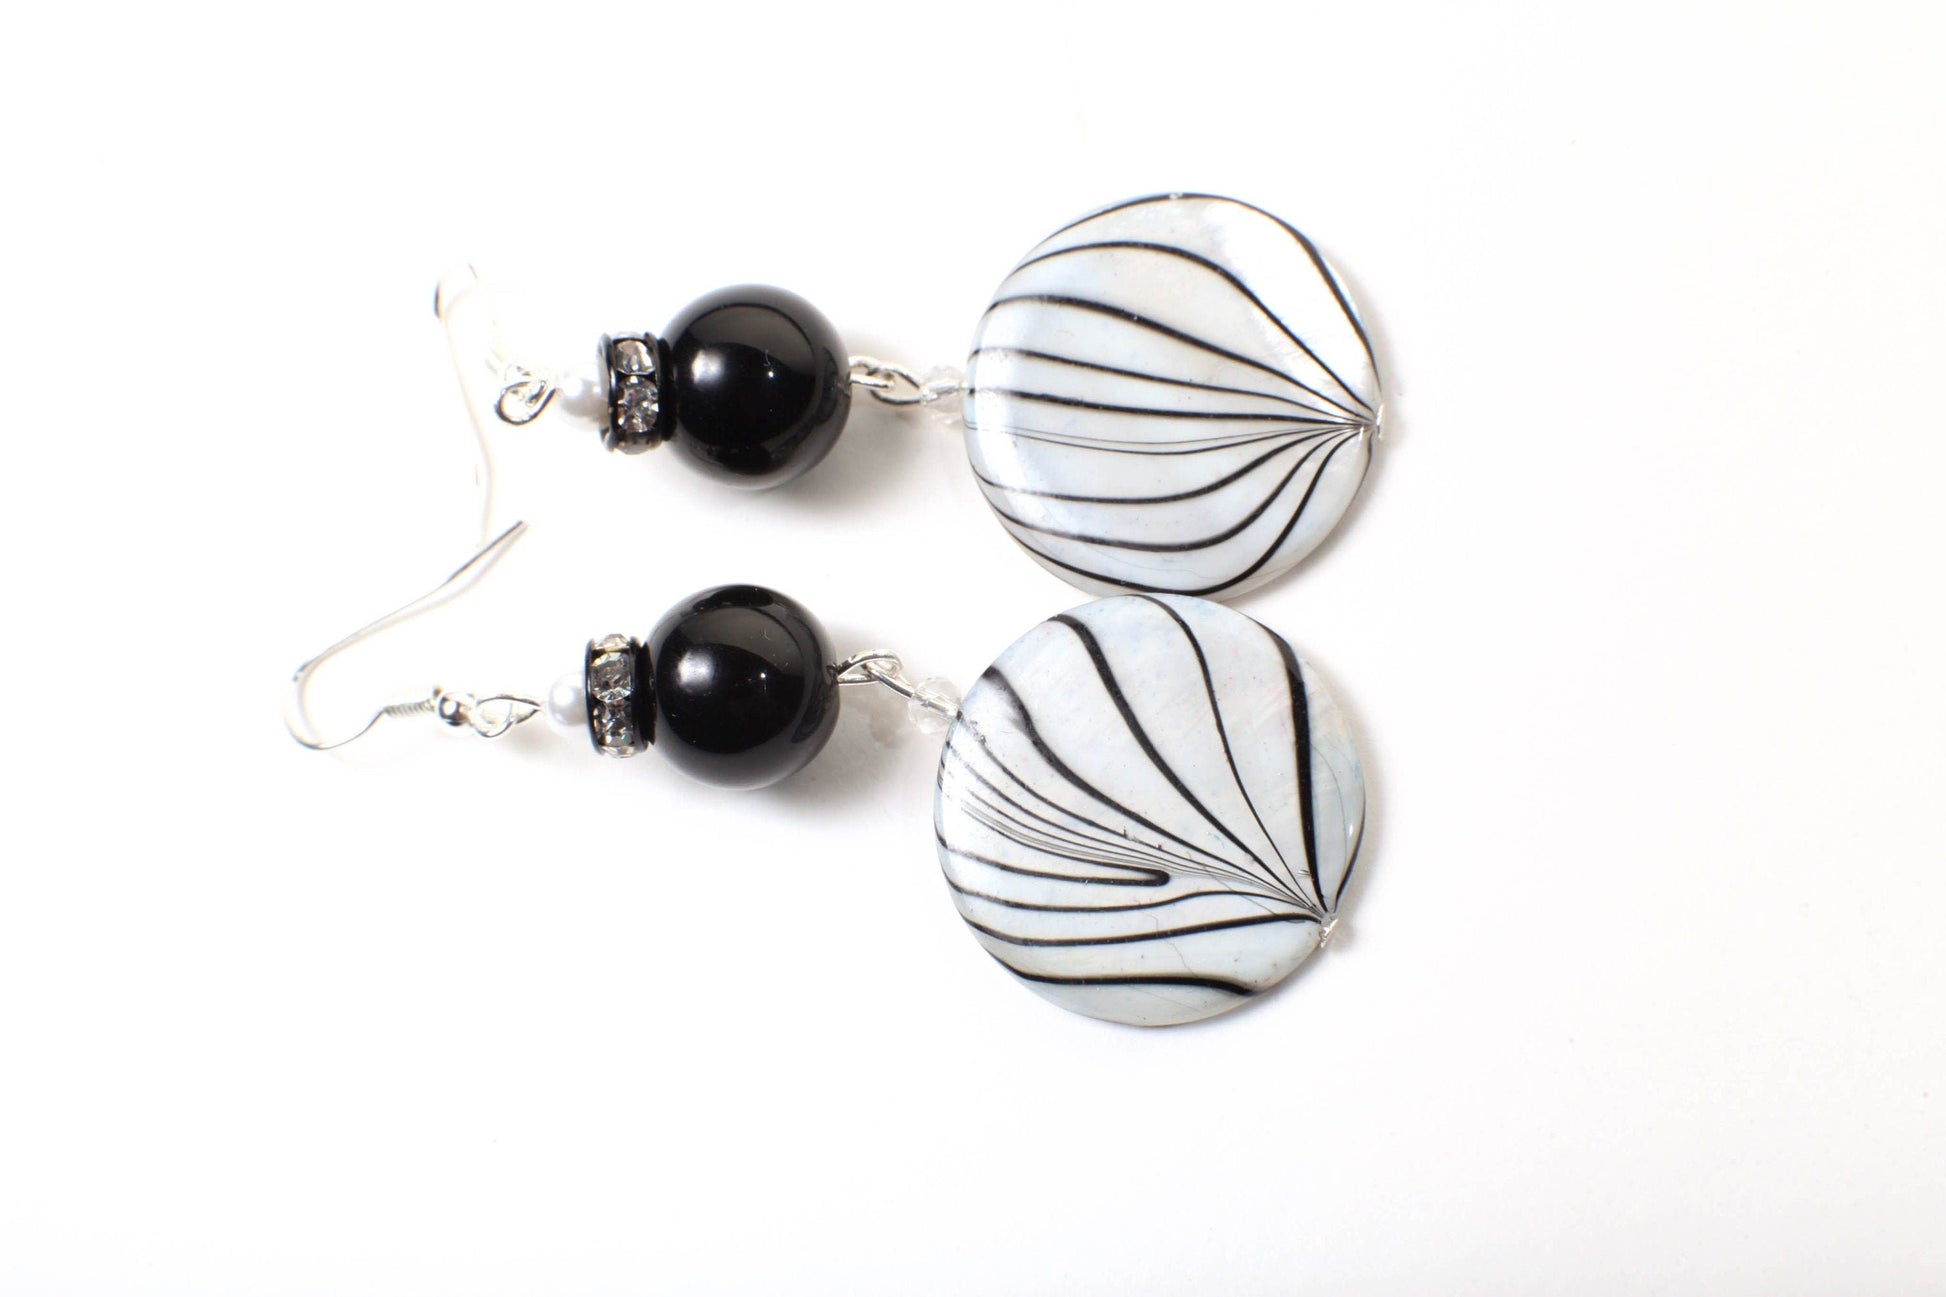 Mother of Pearl Shell 25mm Natural White with Dangling Black Onyx, Rhinestone Crystal Rondelle Spacers Silver Earwire Earrings, Gift for her